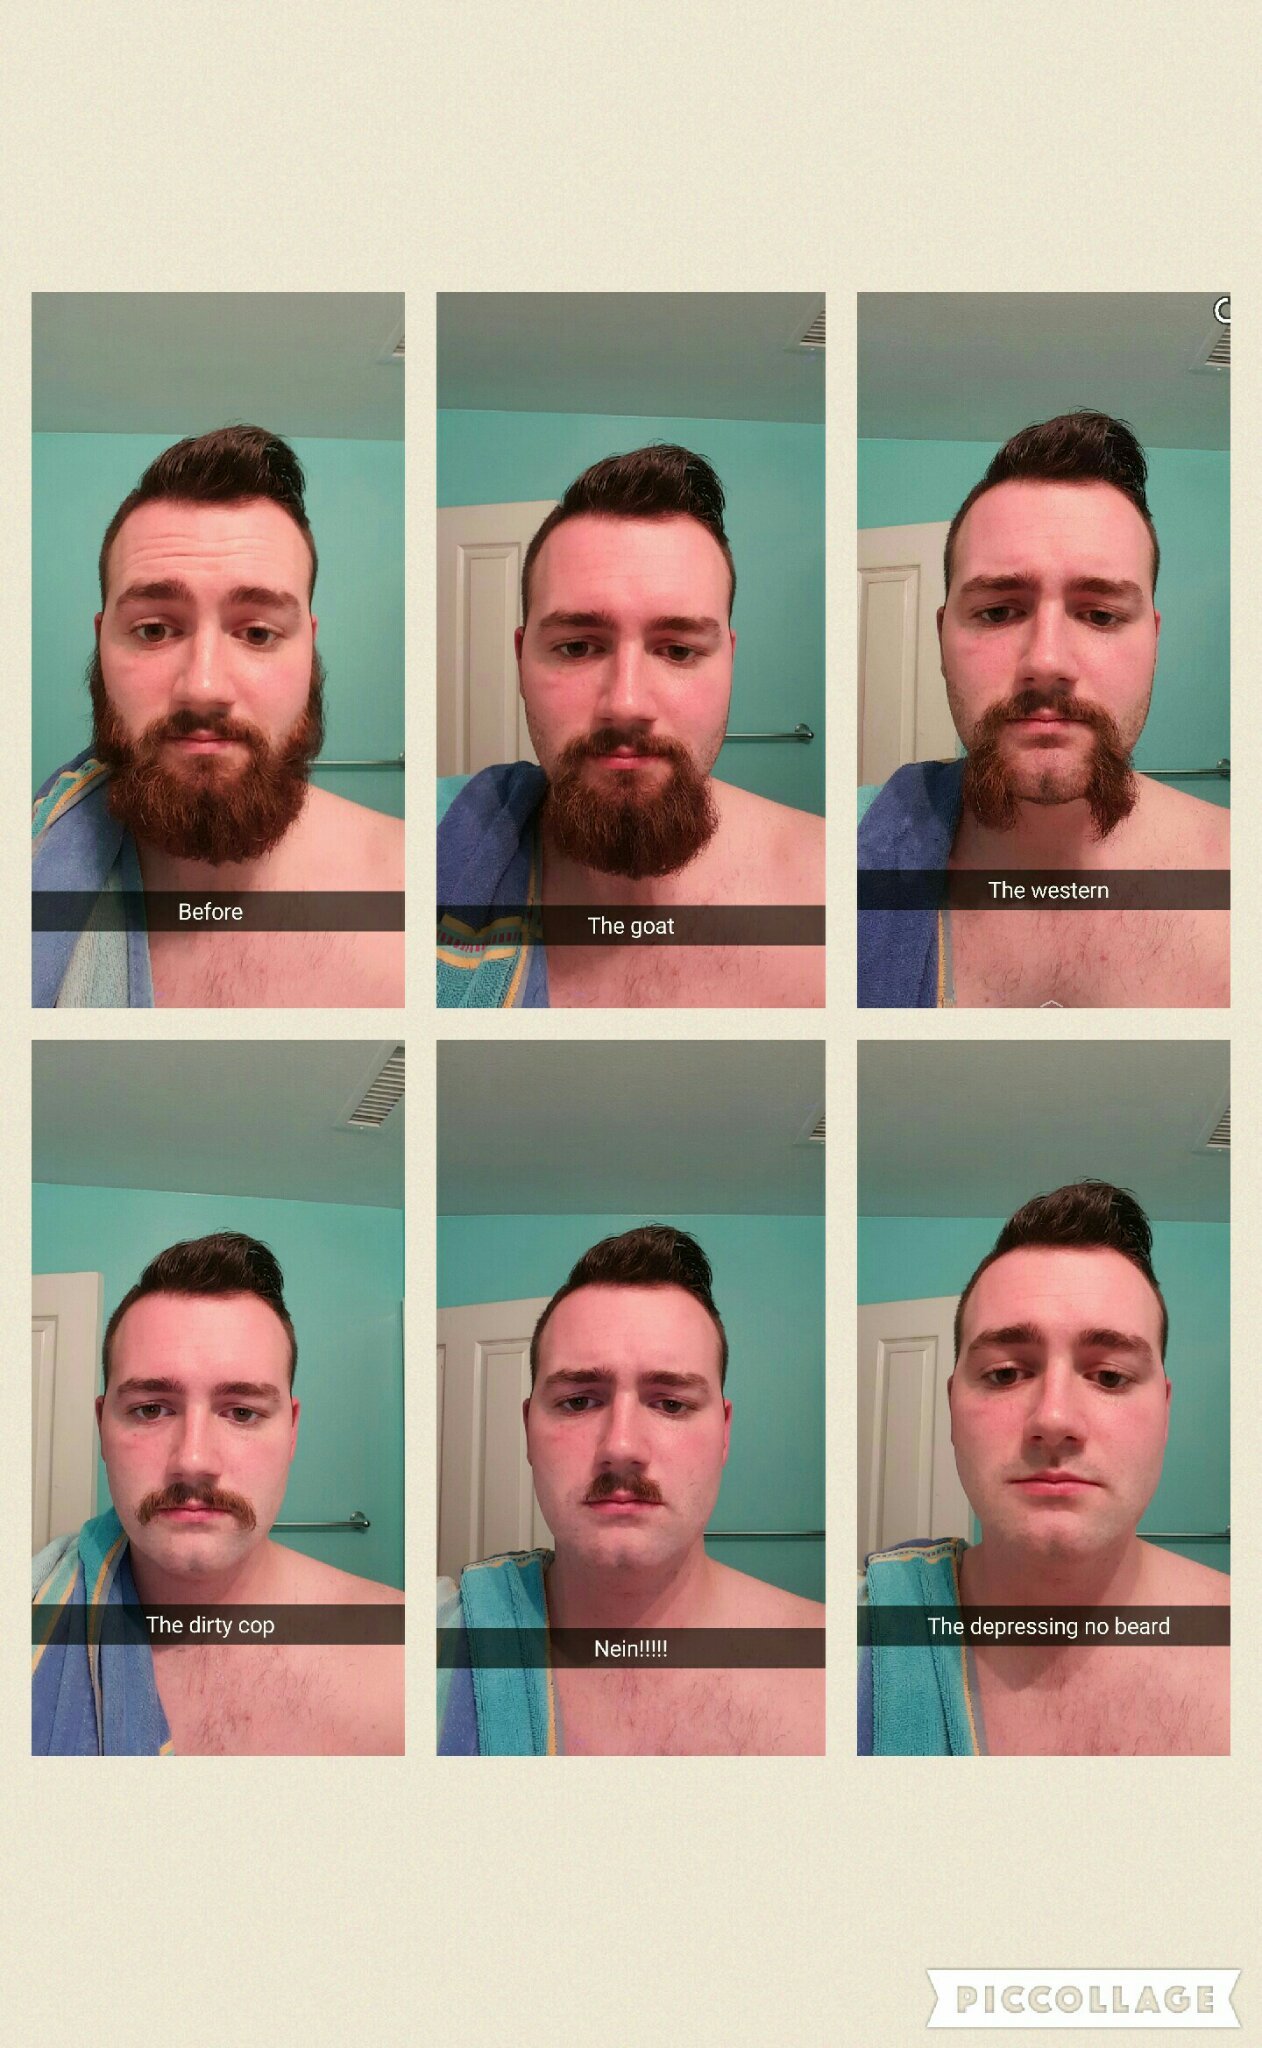 Had to shave for a law enforcement interview, decided to have fun with it - meme